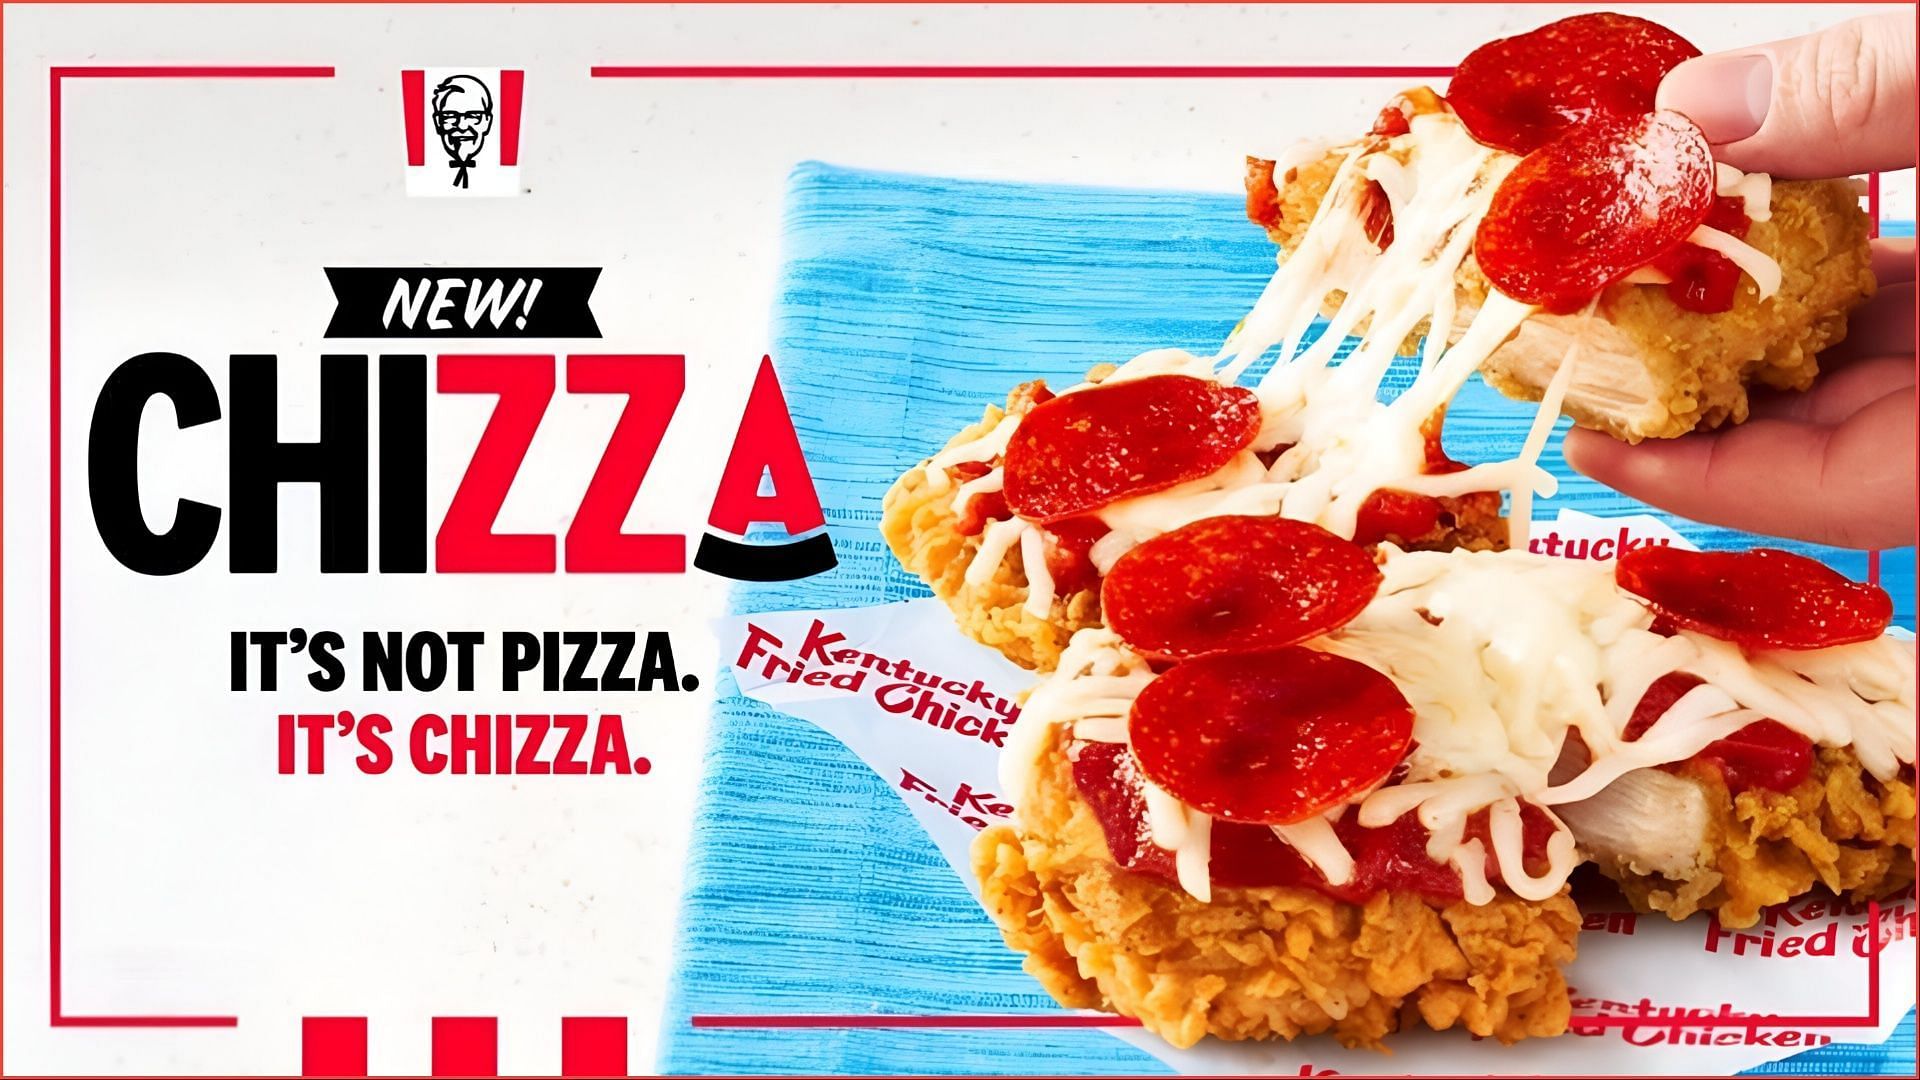 The Chizza is made with all-white-meat chicken fillets (Image via Kentucky Fried Chicken)